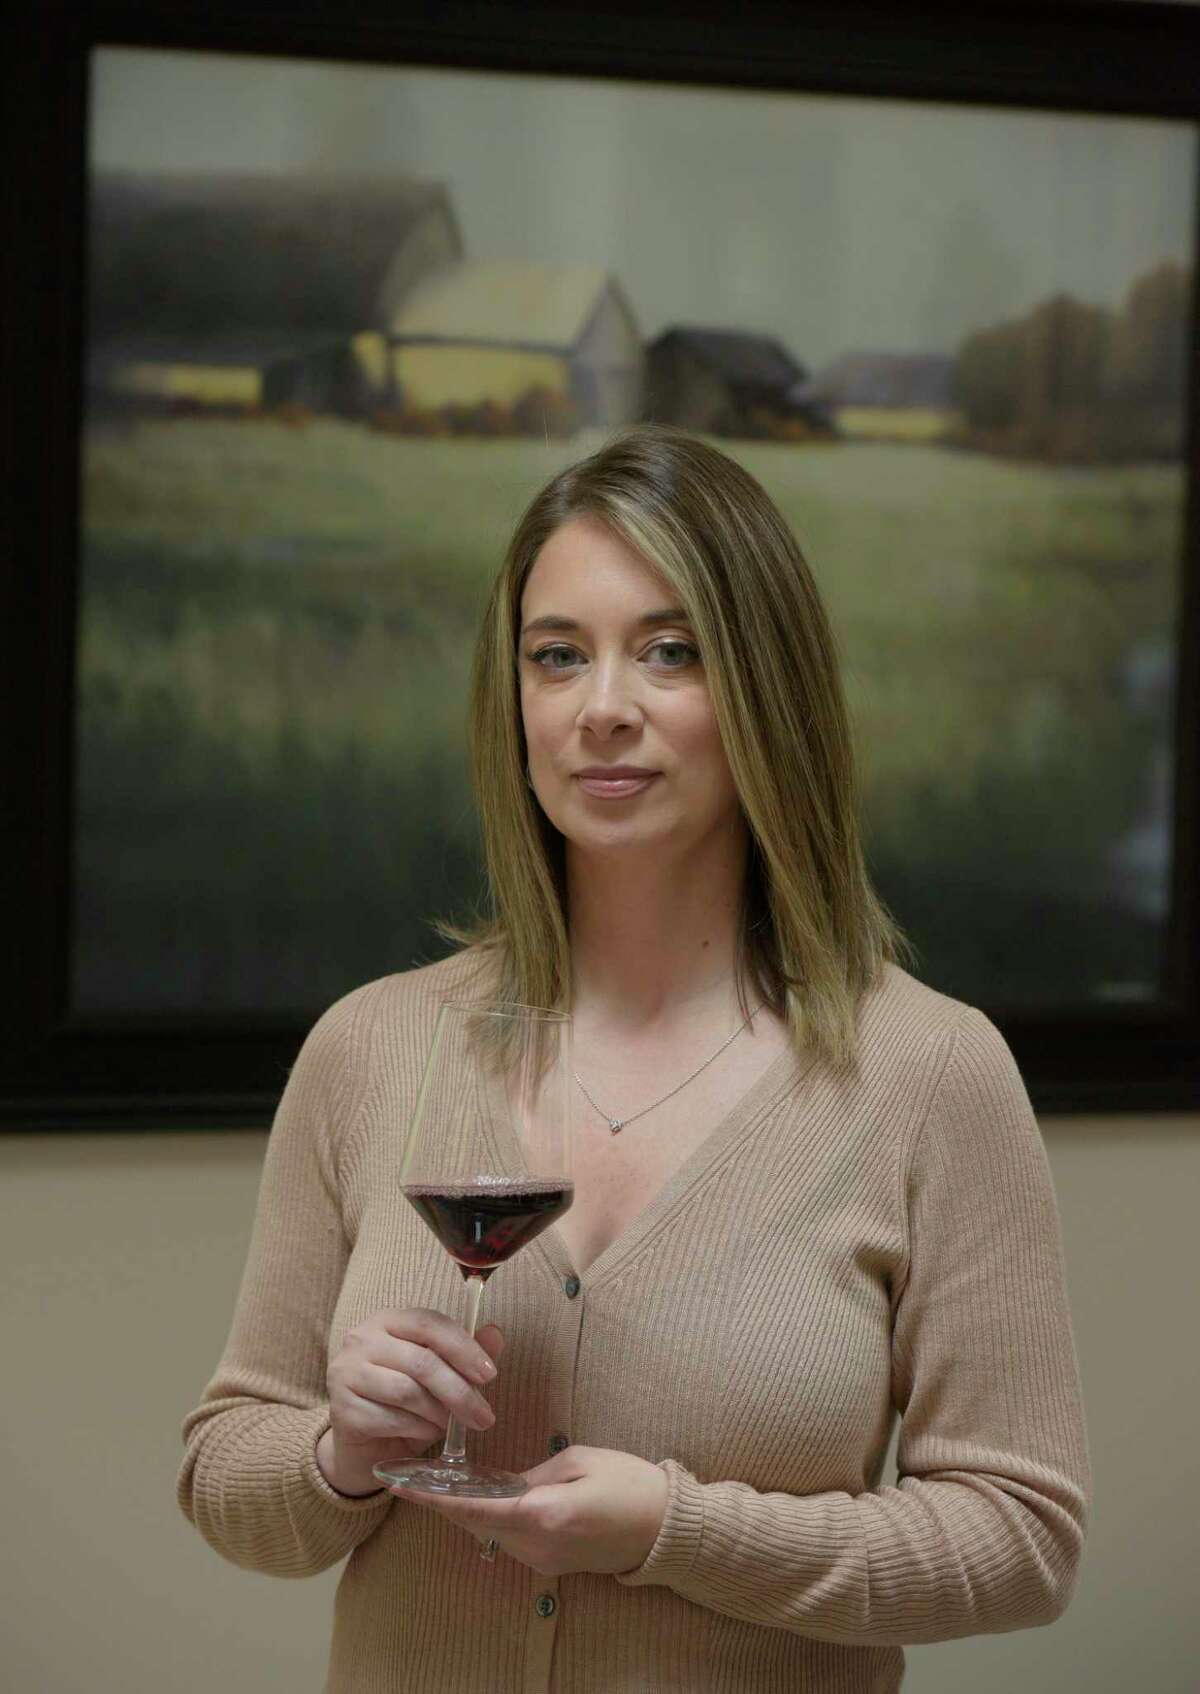 Jillian Fontana, of Ridgefield, is a certified sommelier. Fontana leads wine tastings, both private and corporate. Thursday, Oct. 7, 2021, in Ridgefield, Conn.